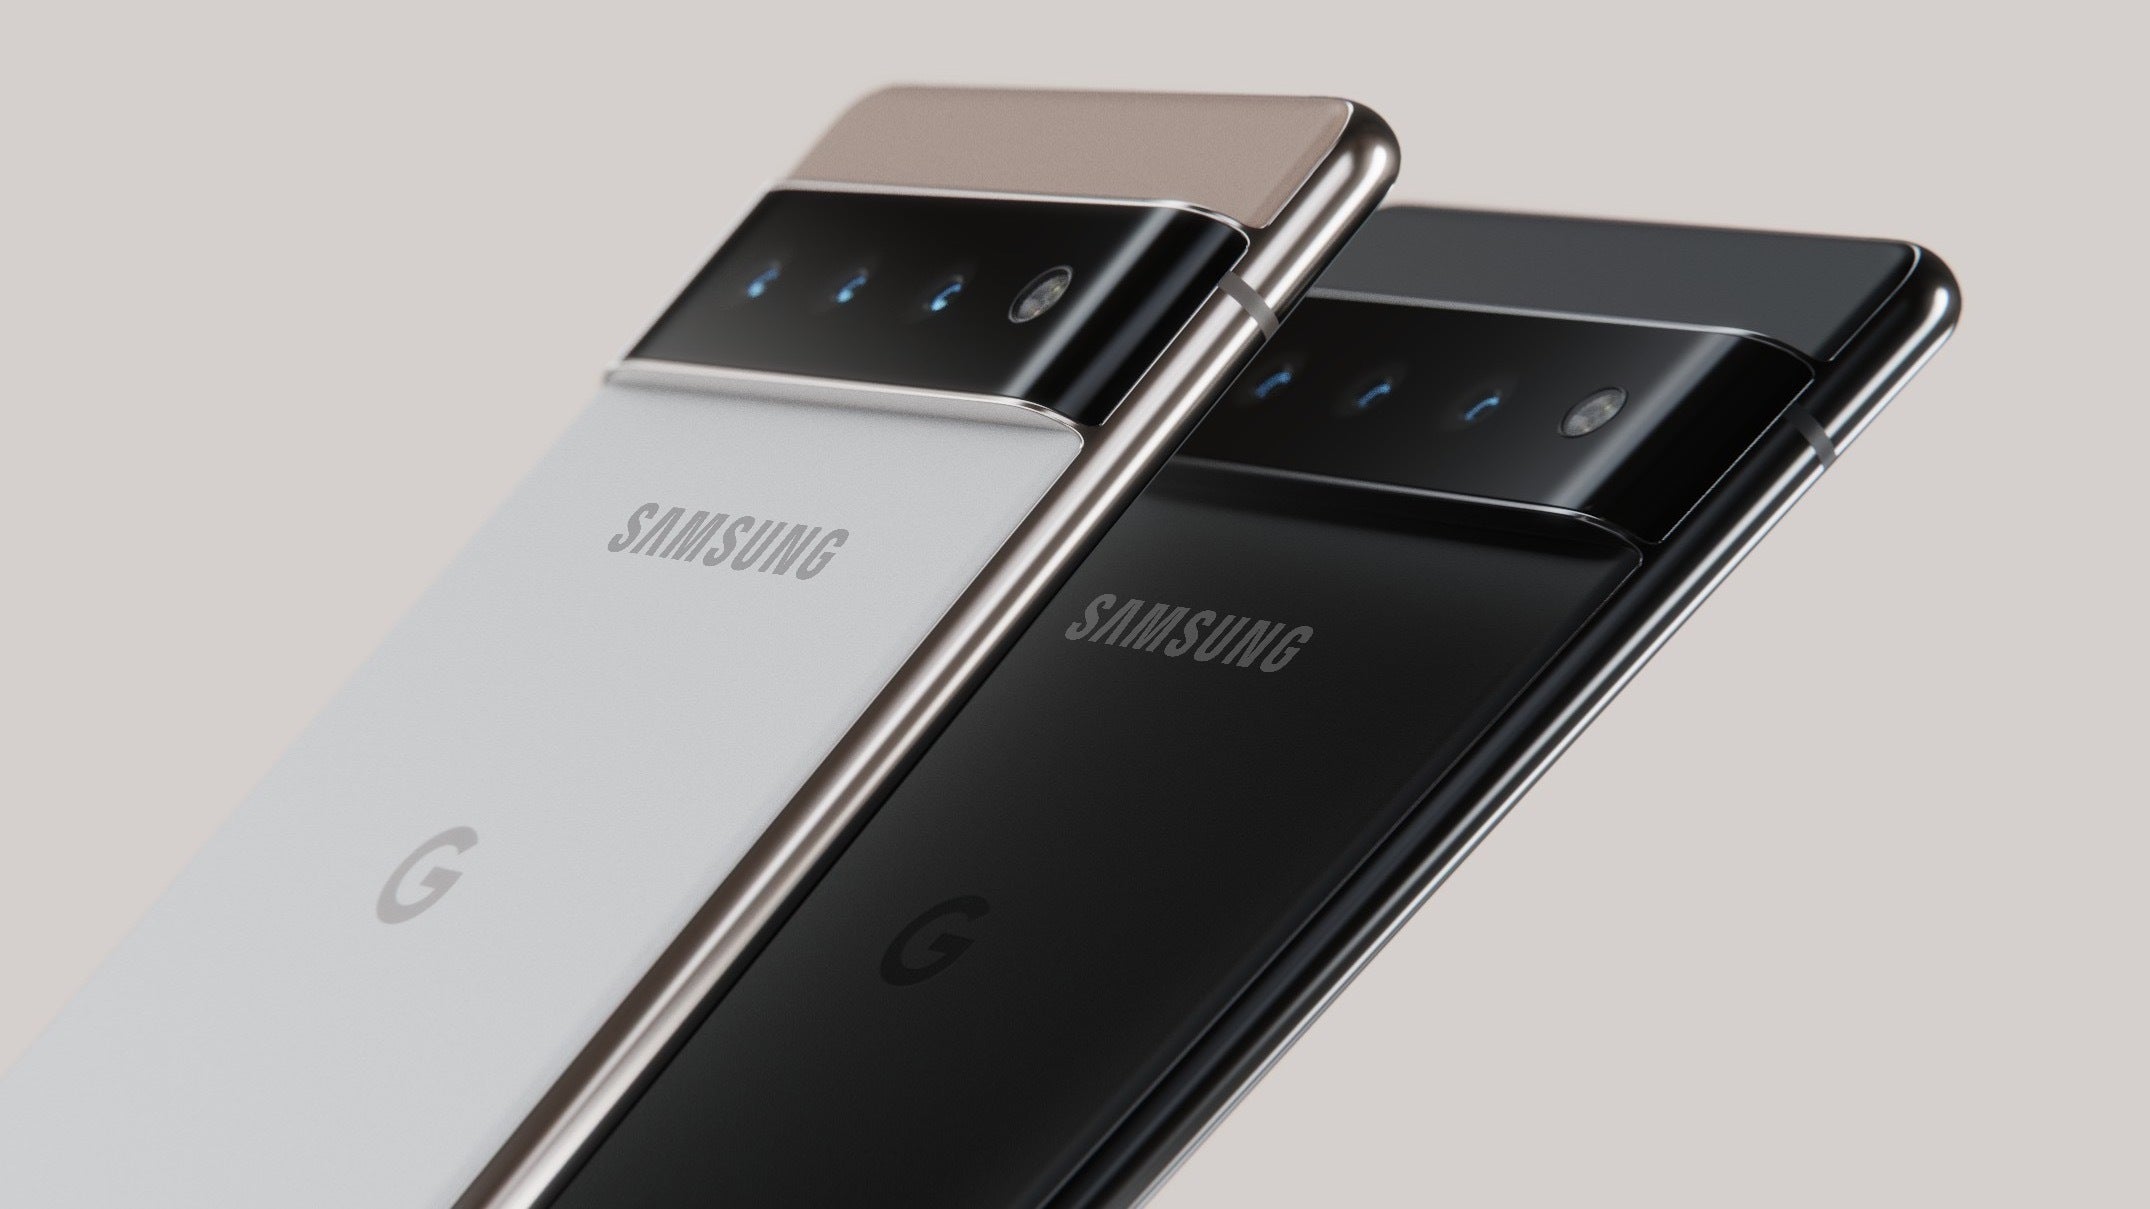 The Google Pixel 6 will be using a Samsung-made SoC, display, and possibly camera sensors. Jonas Daehnert - After a 10-year wait, Pixel 6 is the Samsung-powered Google flagship of your dreams